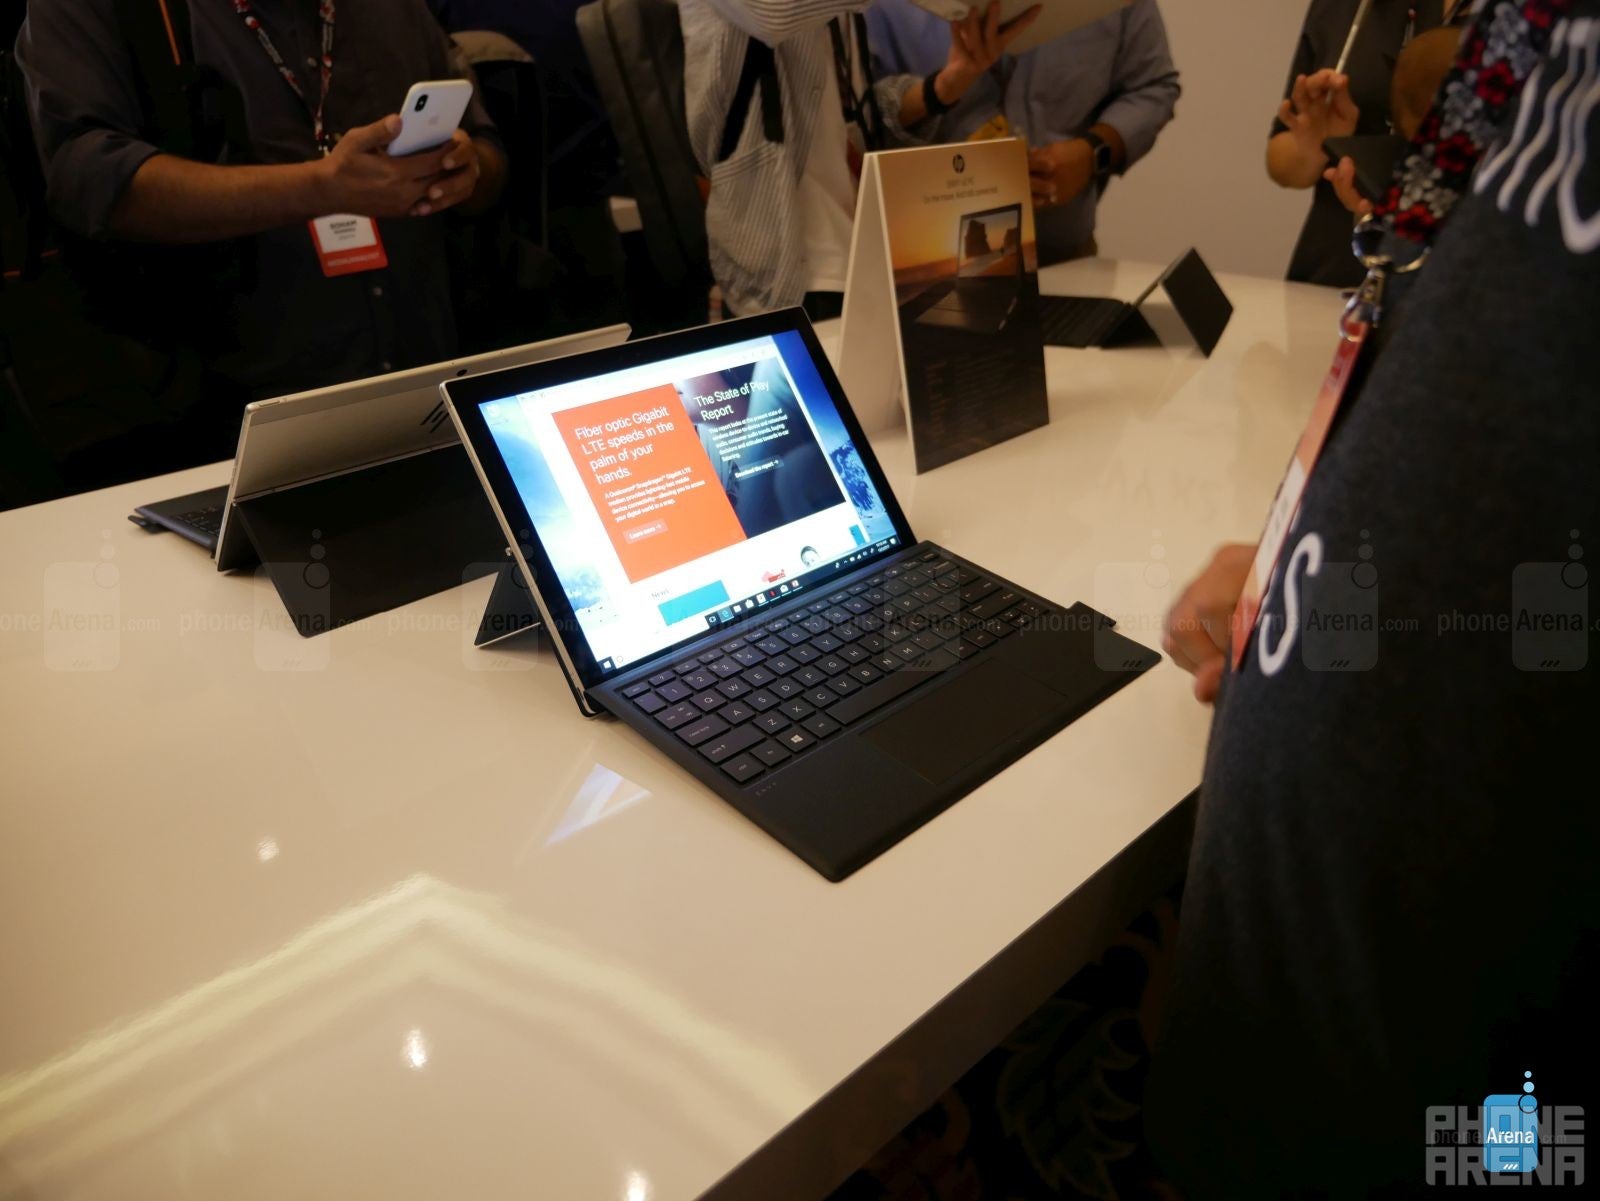 HP Envy x2 hands-on: a Snapdragon 835-powered Surface competitor with outstanding battery life